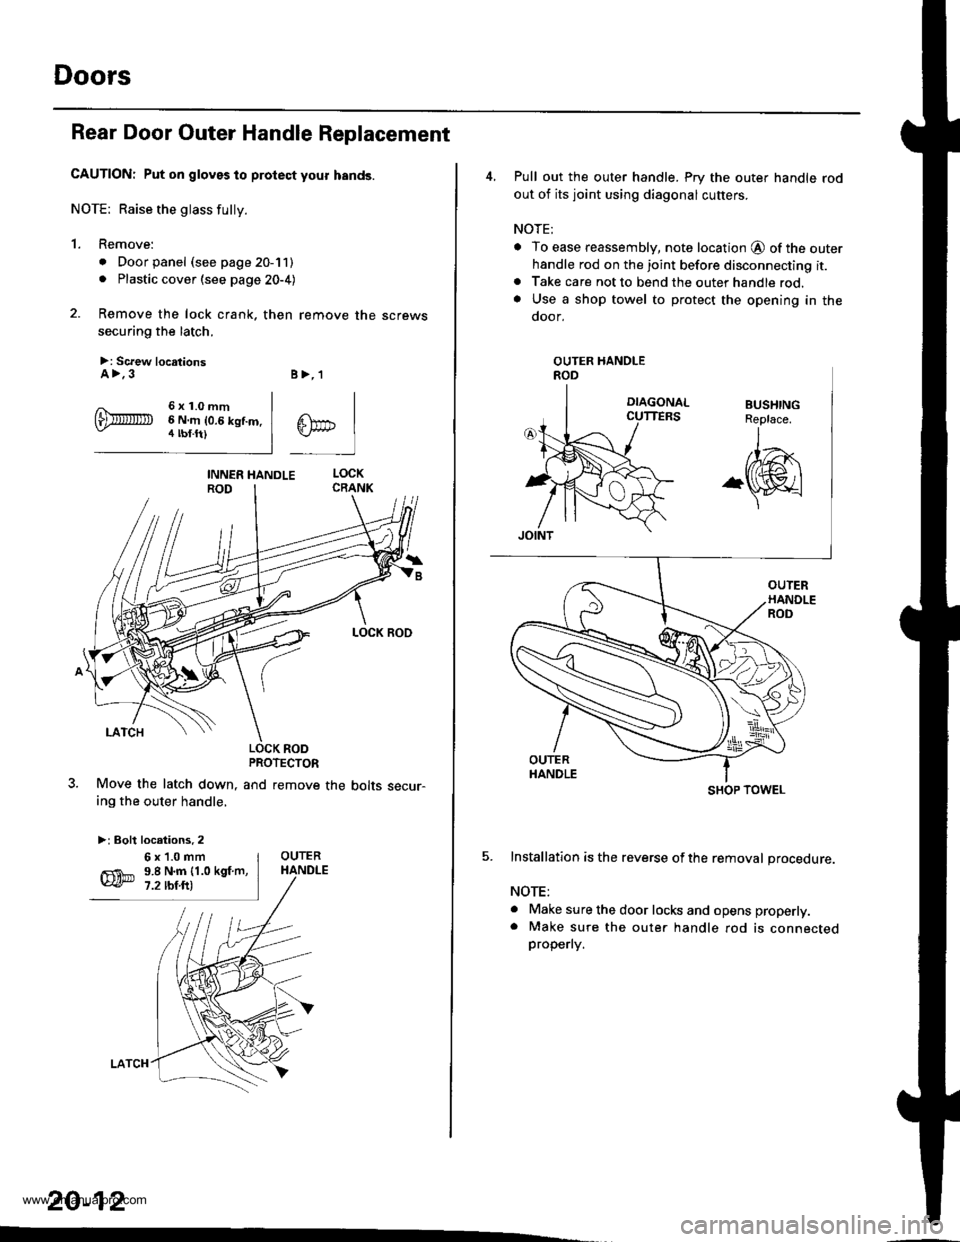 HONDA CR-V 2000 RD1-RD3 / 1.G Workshop Manual 
Doors
Rear Door Outer Handle Replacement
CAUTION: Put on gloves to protect your hands.
NOTE: Raise the glass fully.
1. Remove:
. Door panel (see page 20-11). Plastic cover (see page 20-4)
2. Remove t